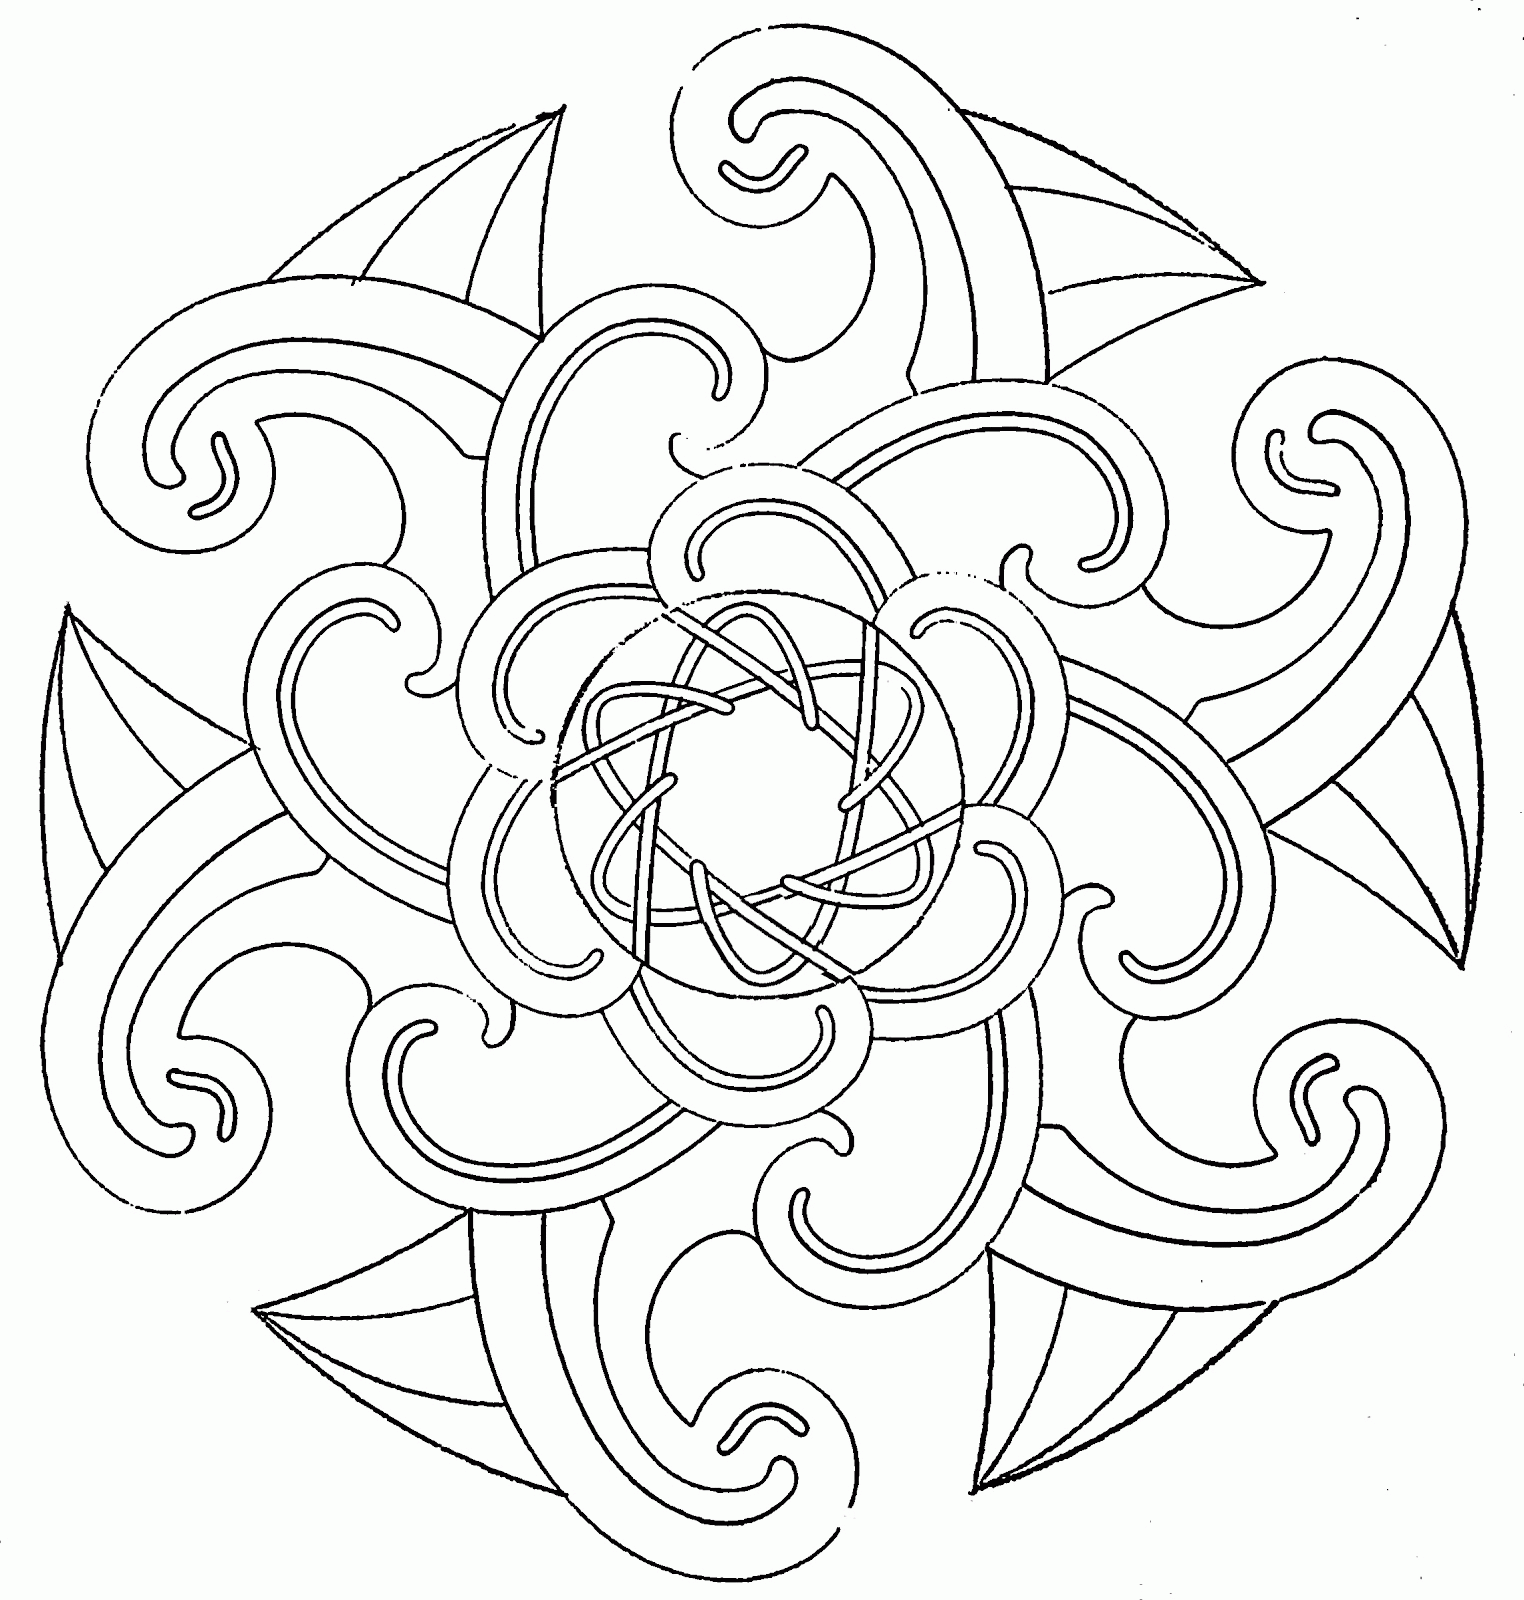 Printable Cool Coloring Pages Designs - Coloring Home